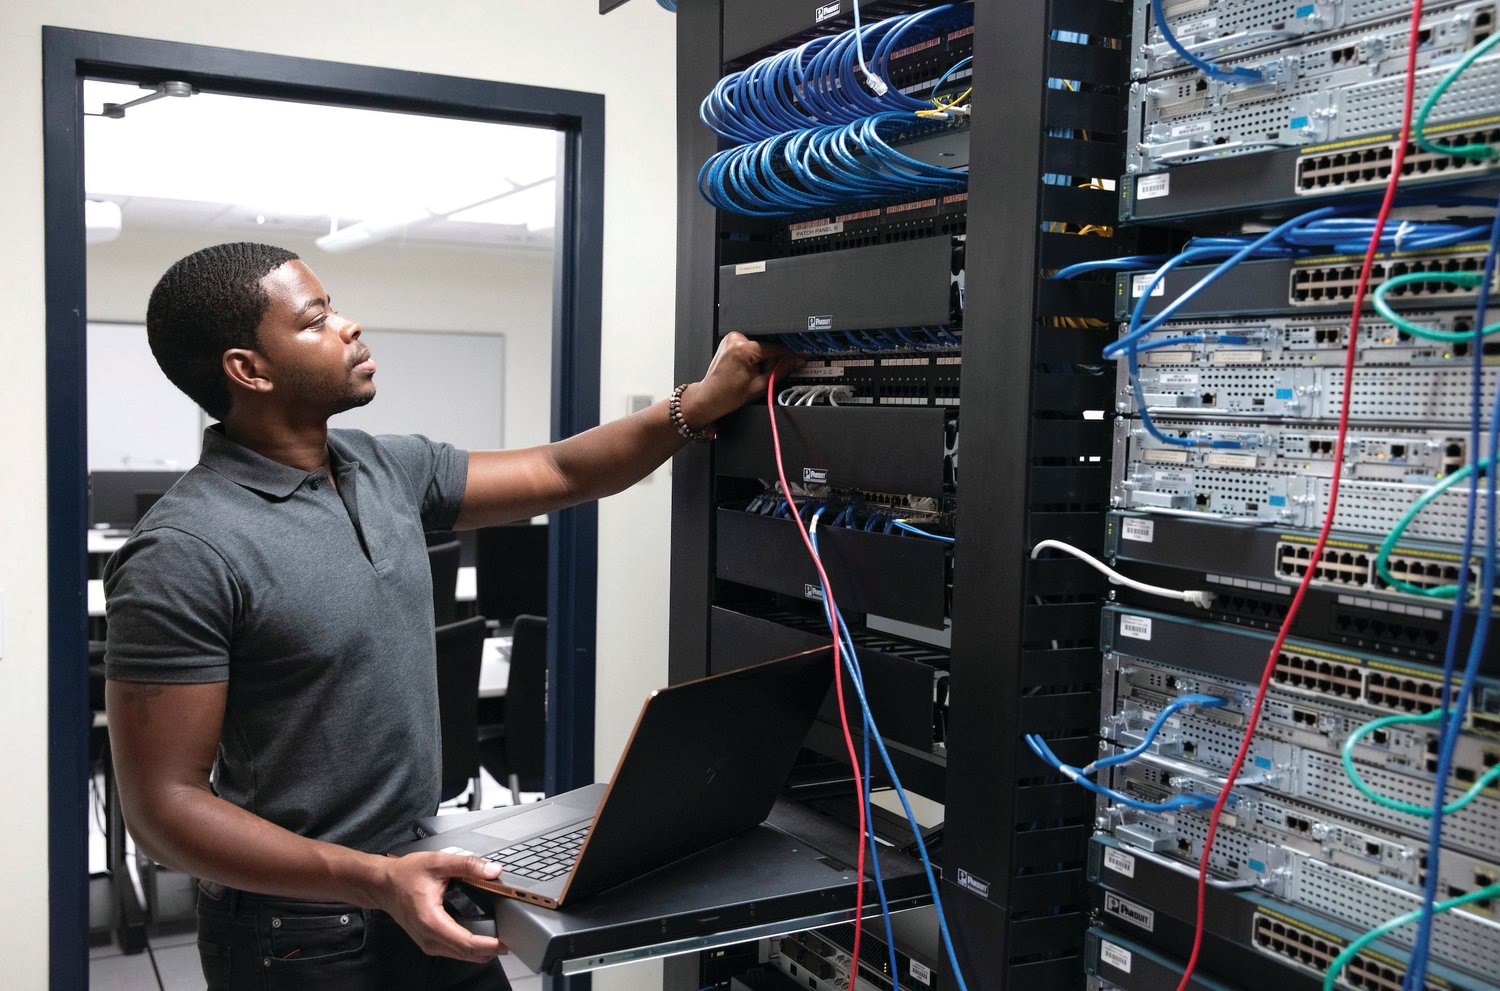 IRSC has added a new Upskill/Reskill offering in the in-demand field of cyber security, allowing students to earn this valuable certification in as little as eight weeks. Courses for this certification are completely online and begin Oct. 14.